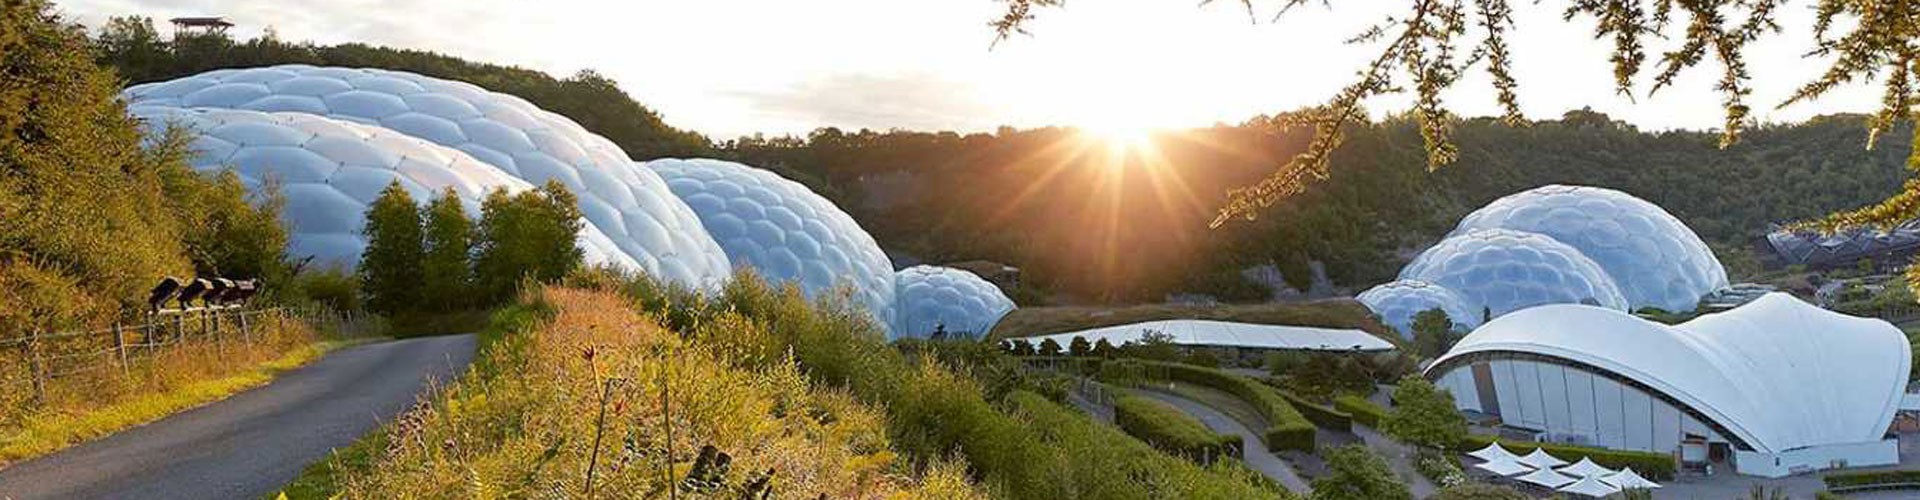 Eden Project biomes with sun shining low in the sky